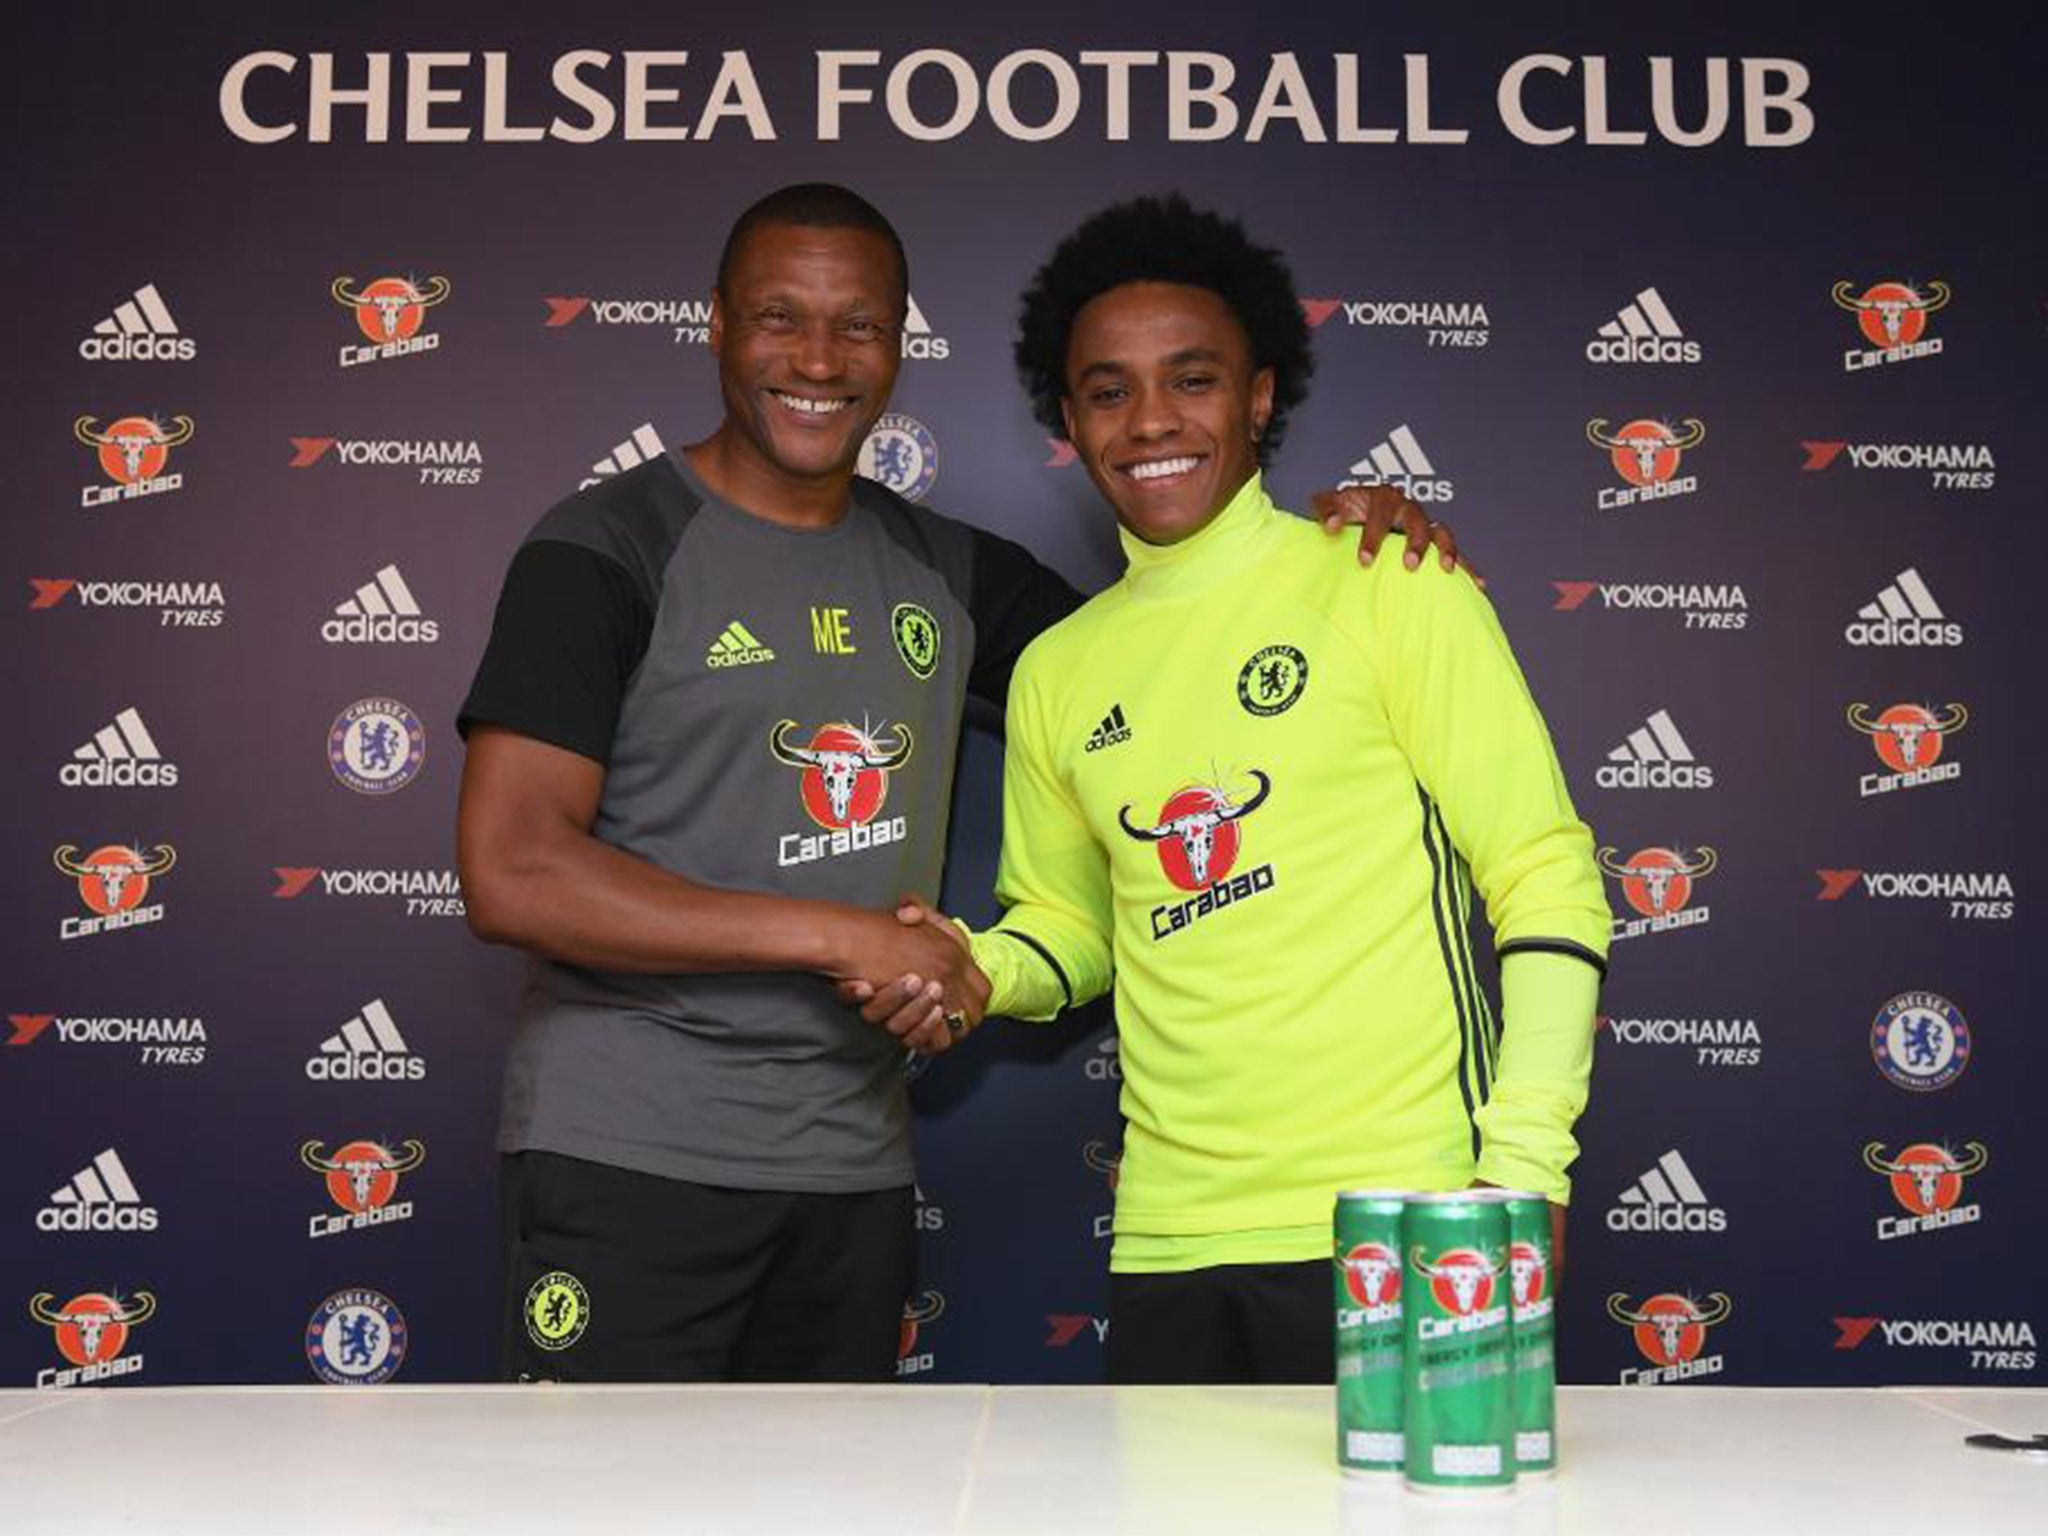 Willian has agreed a new four-year contract with Chelsea